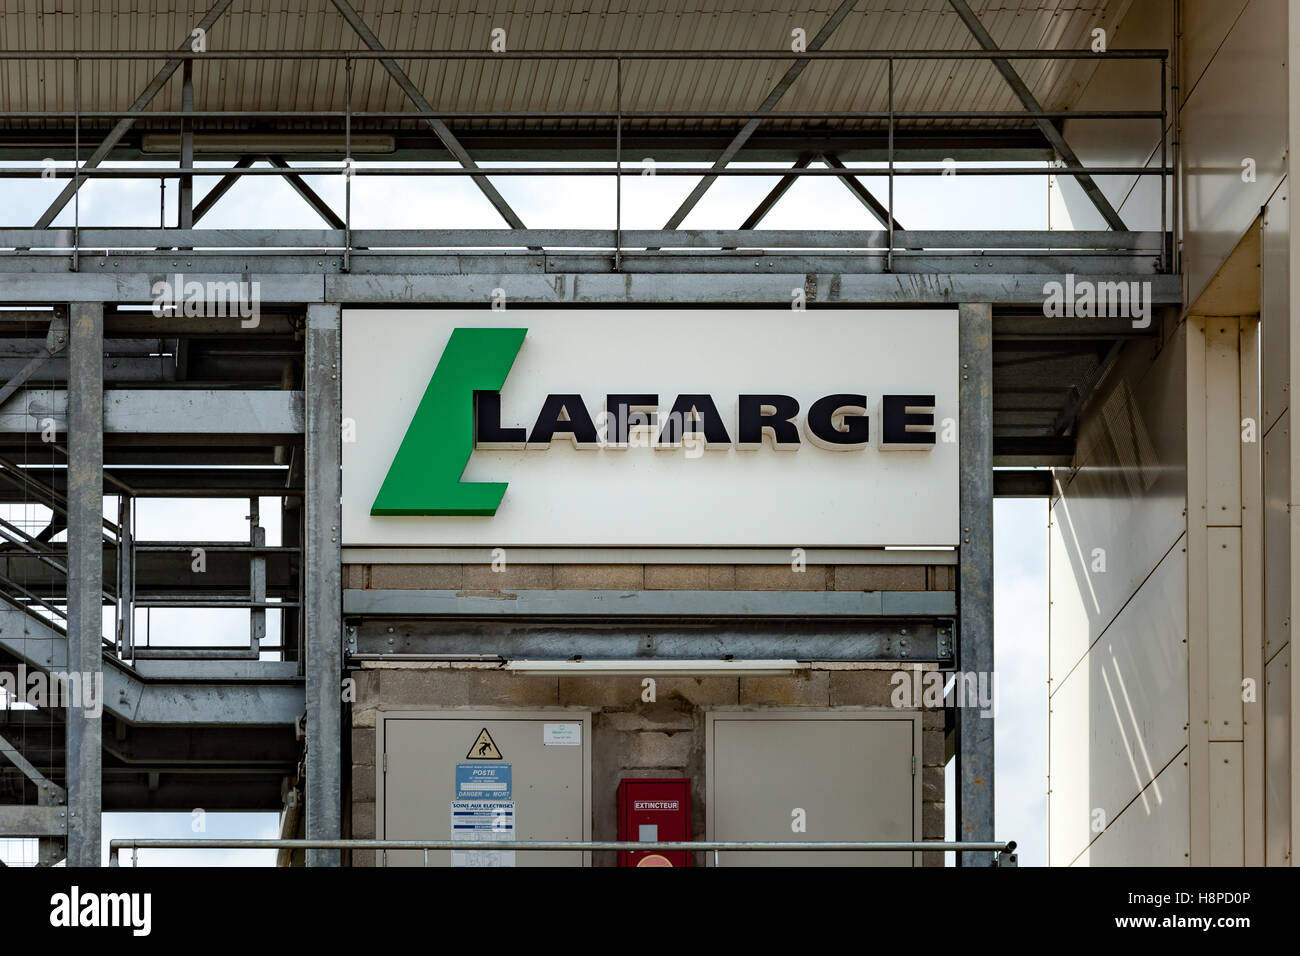 Lafarge Cement High Resolution Stock Photography and Images - Alamy